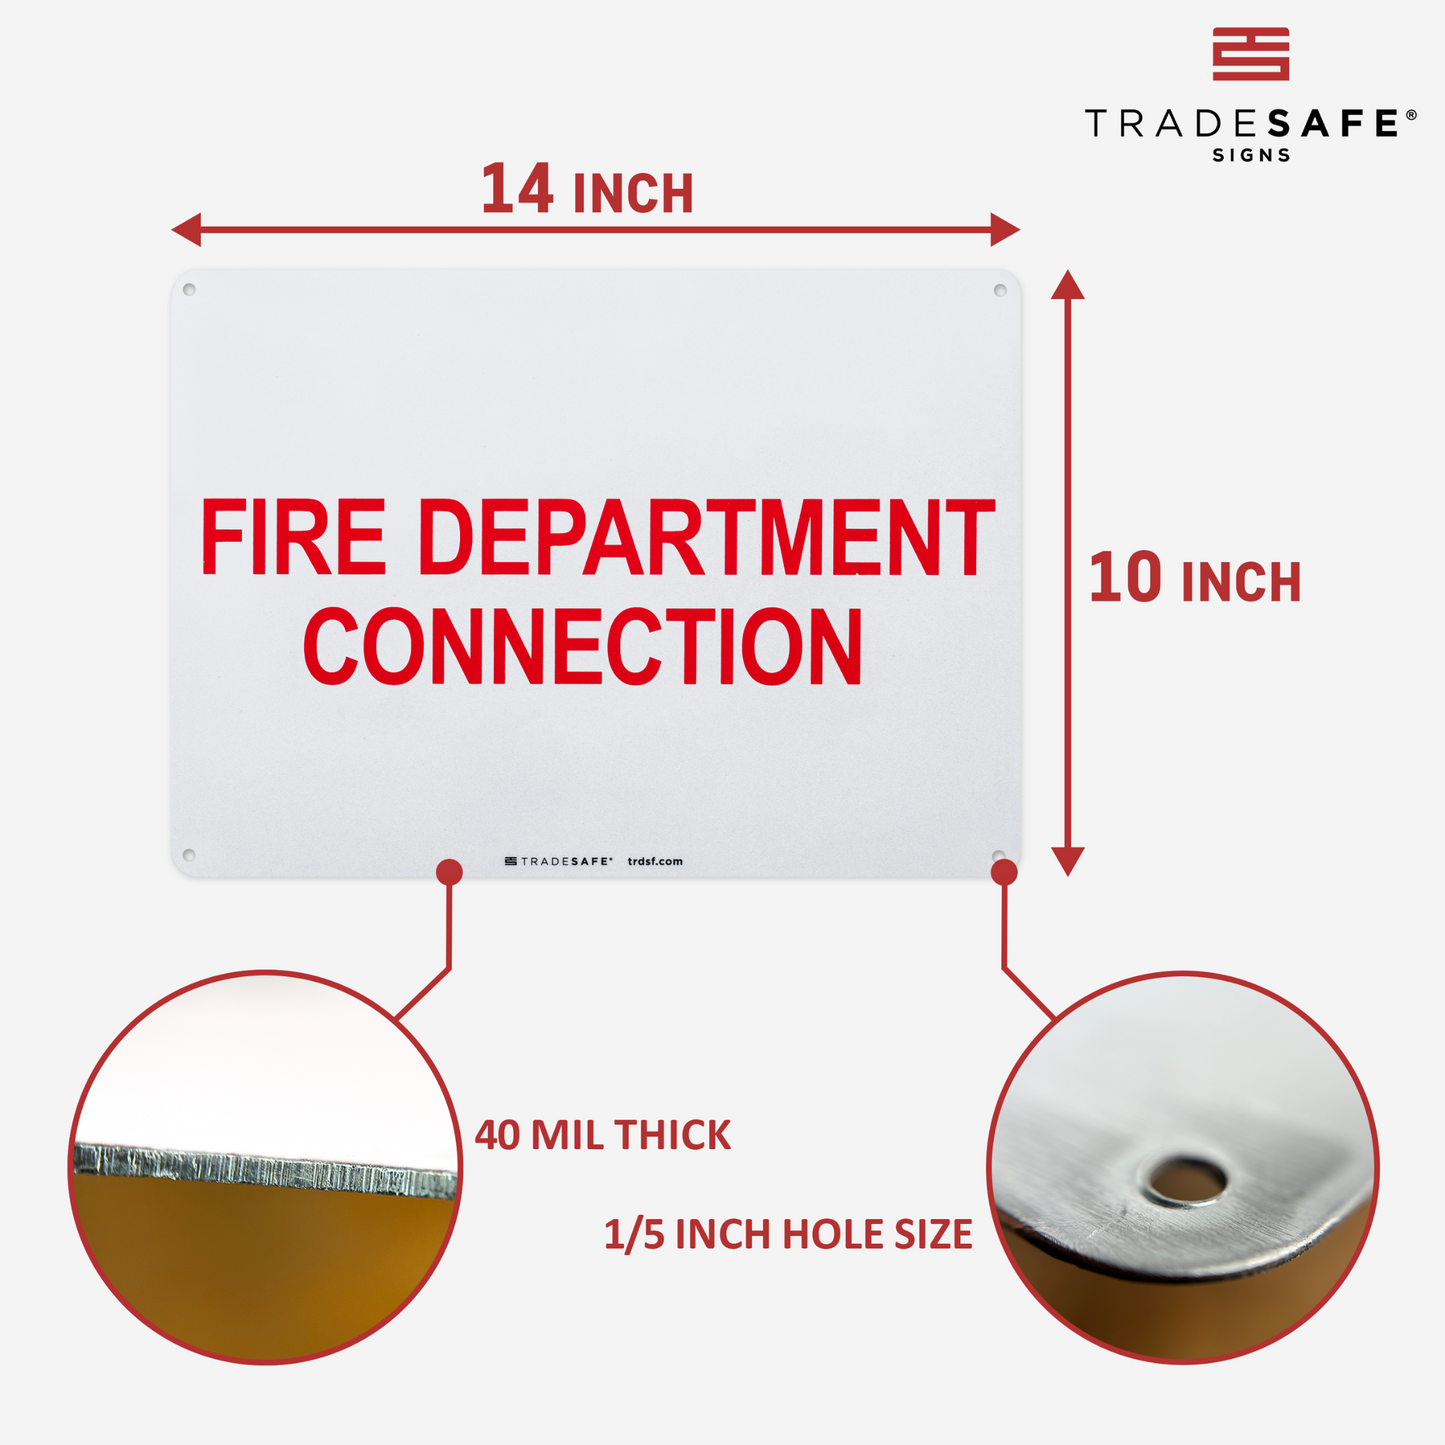 dimensions of fire department connection sign